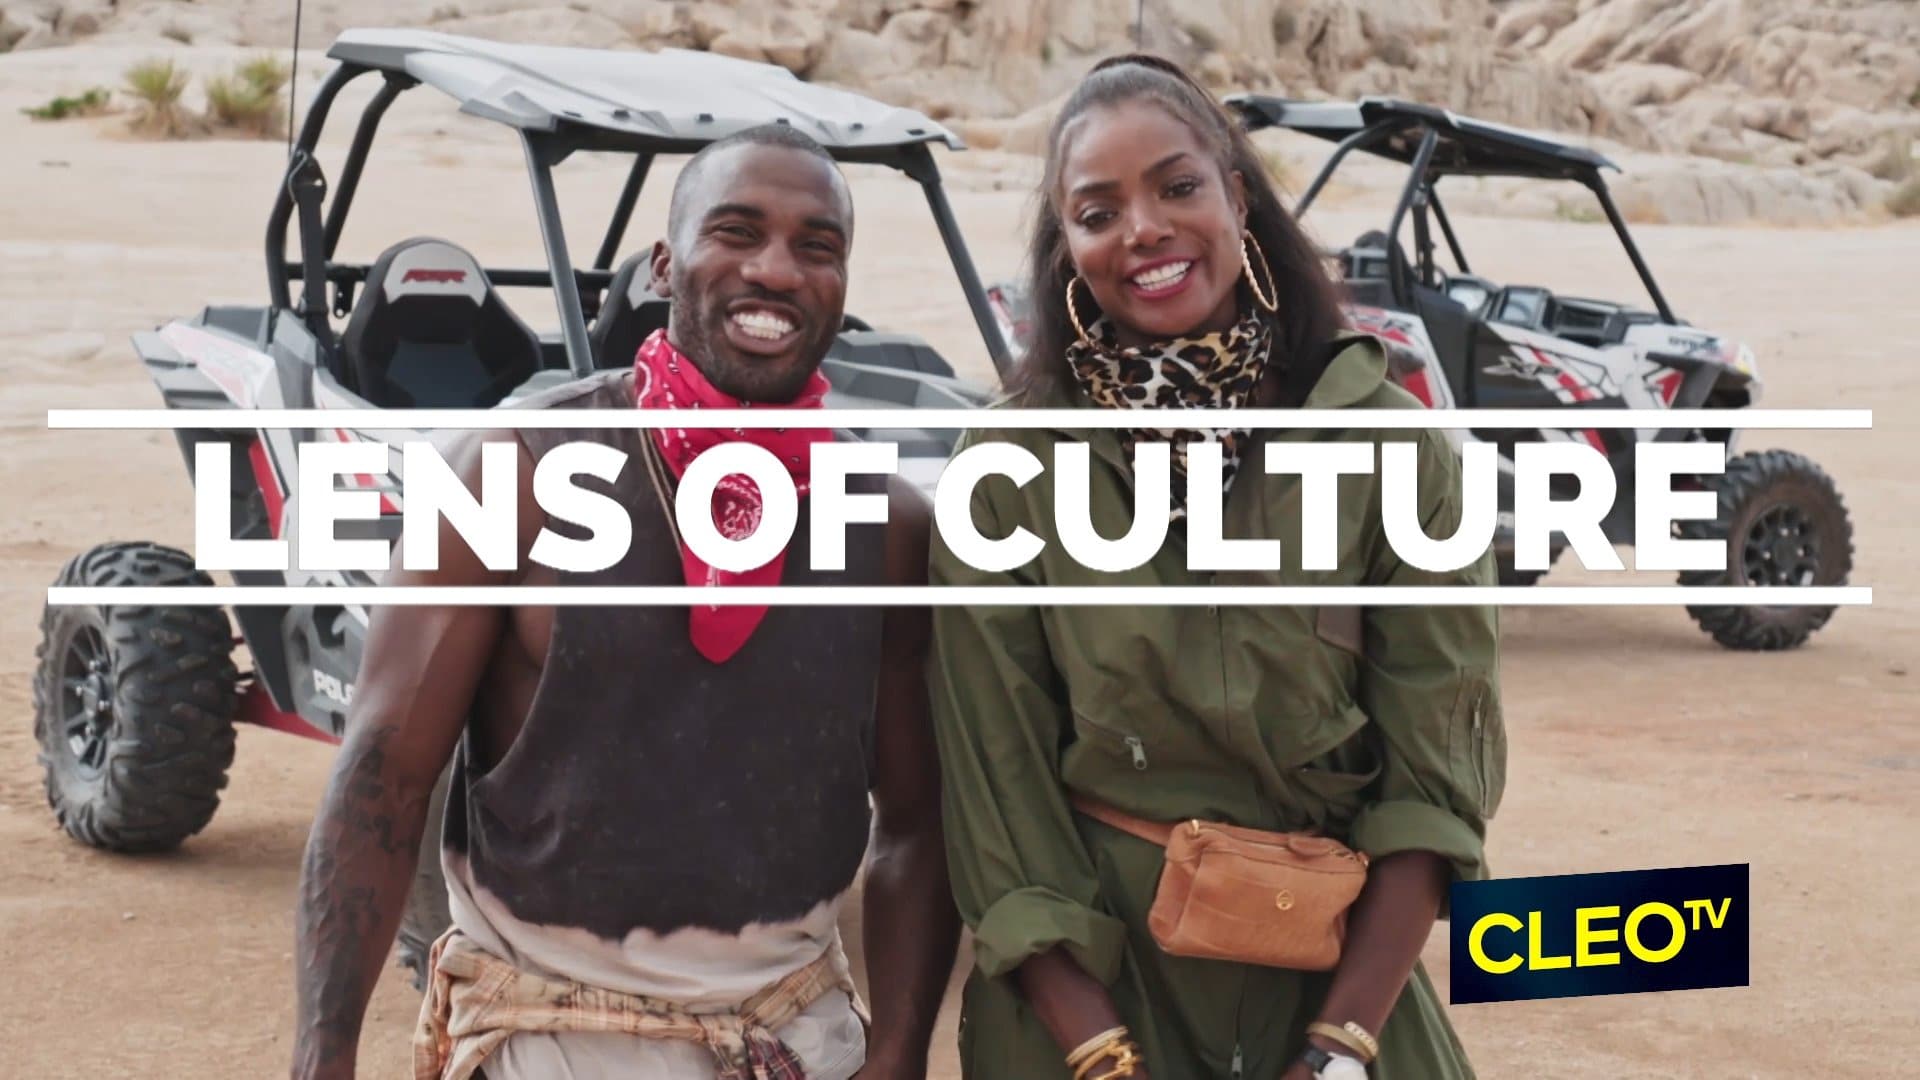 Lens of Culture Happy Trails Rental CleoTV